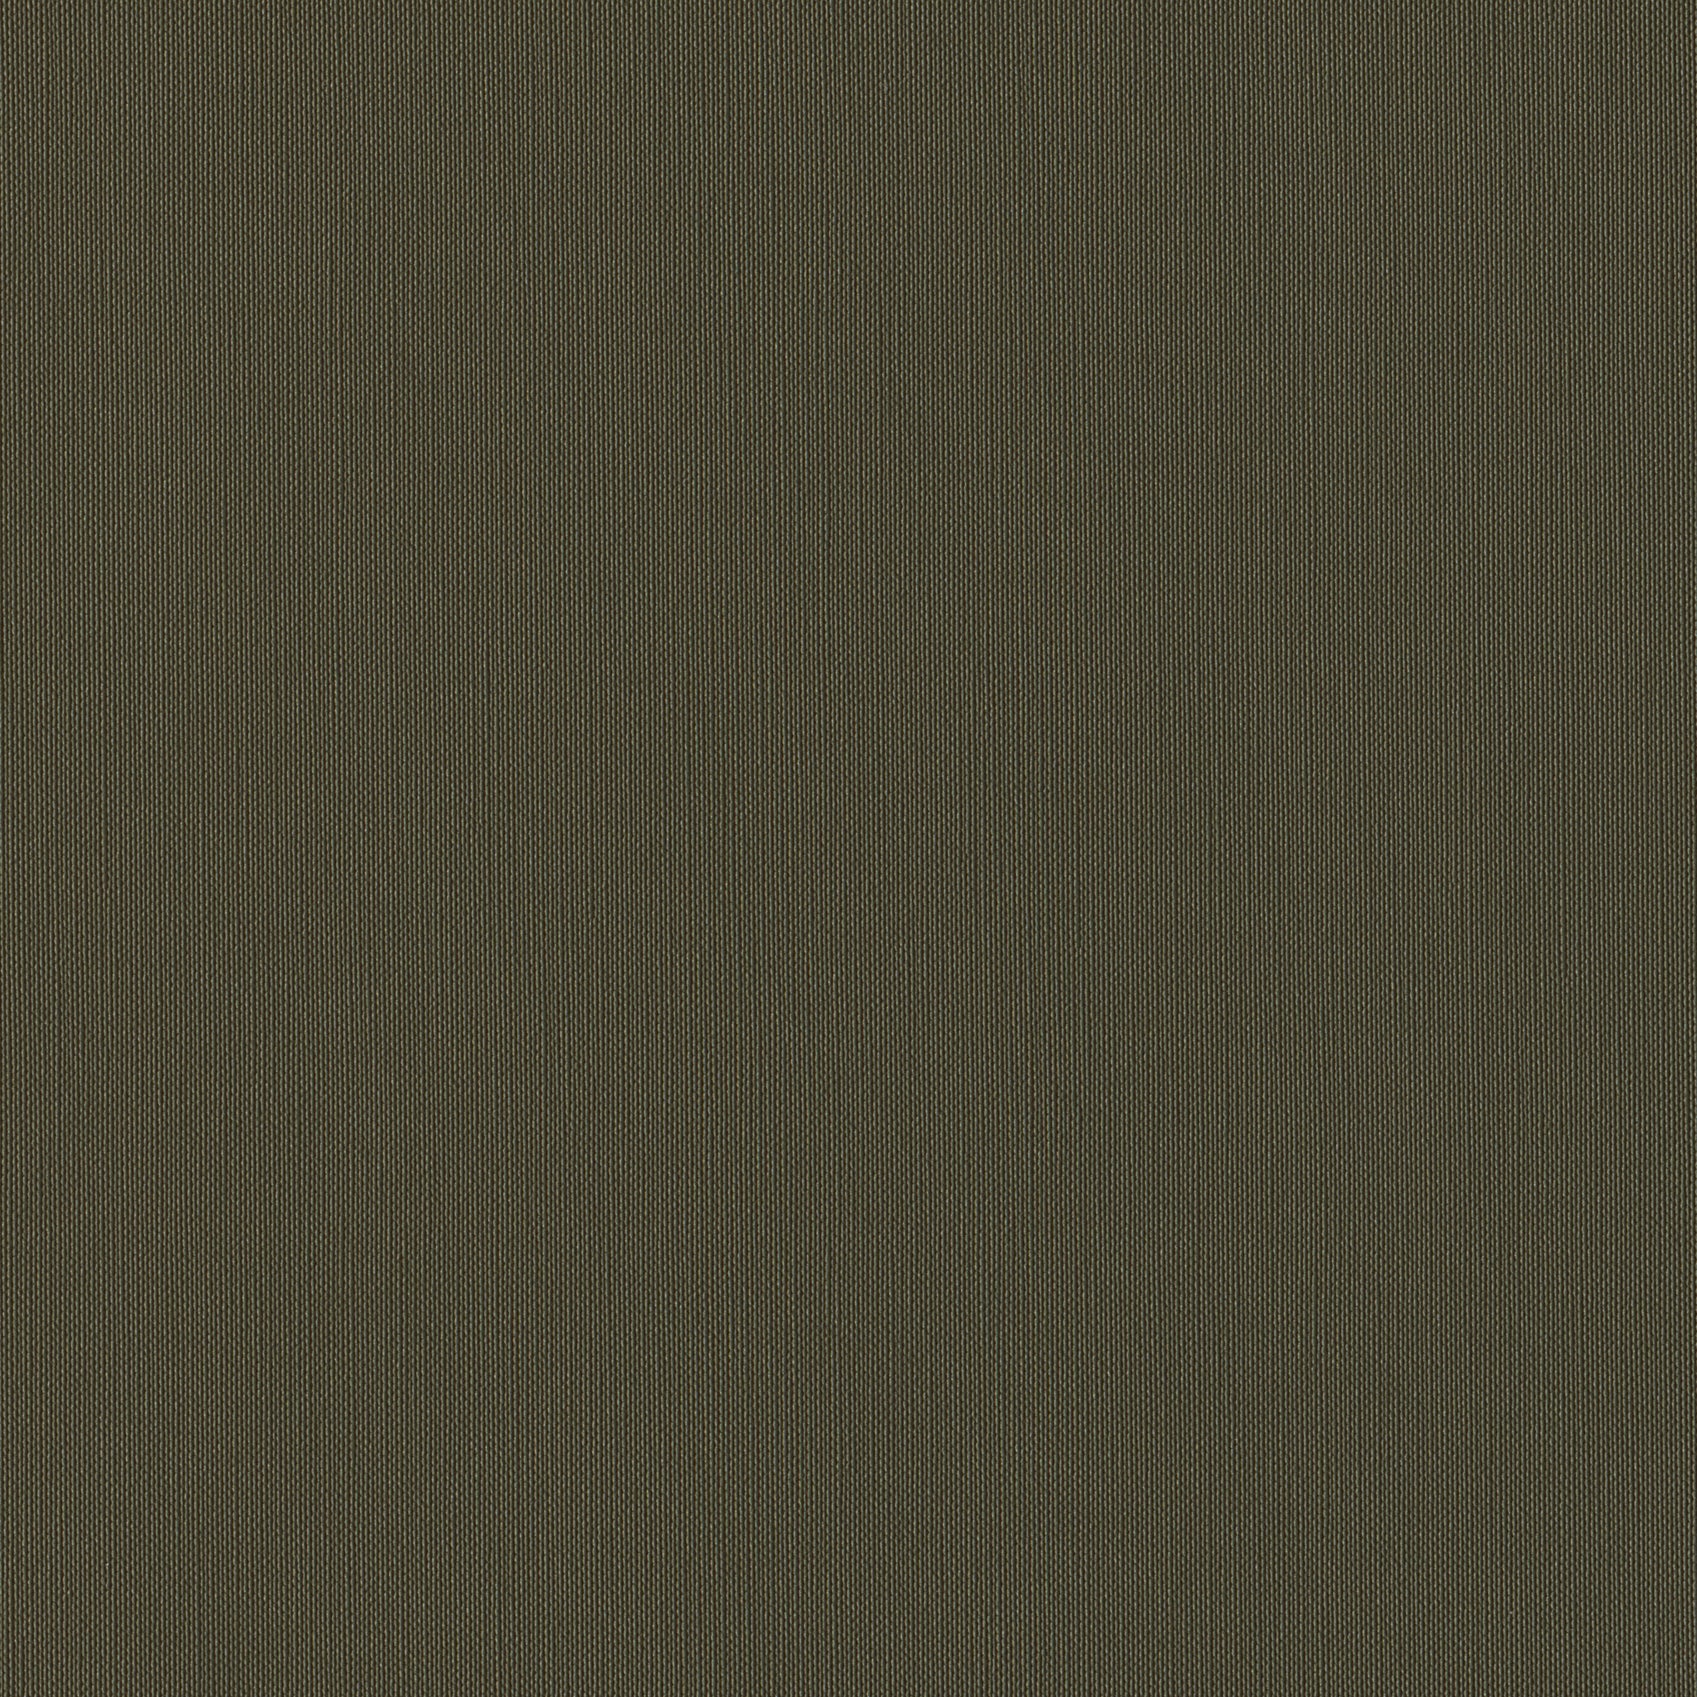    Andriali-Contract-Vinyl_Upholstery-Design-LegendFR-FR5-Color-430Olive-Width-140cm